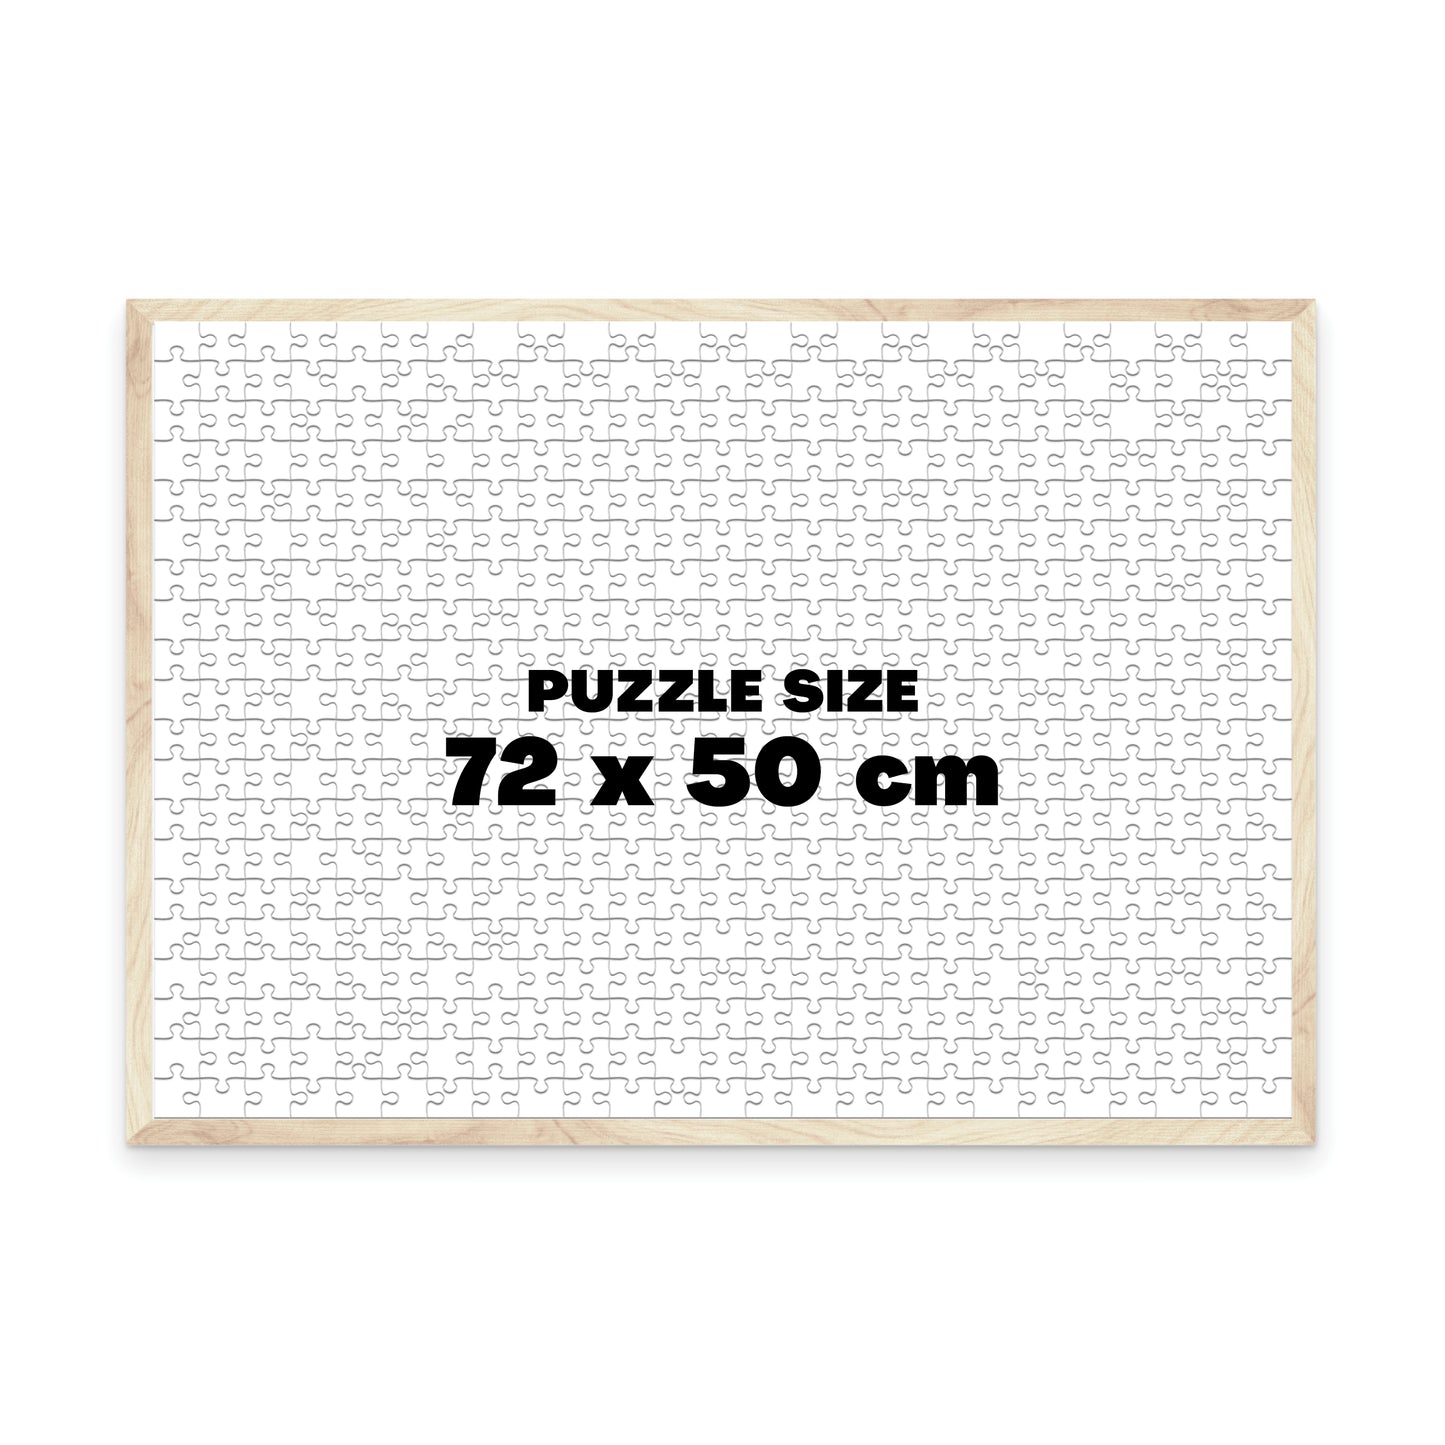 Puzzle Frame - 72 x 50 cm - With Easy-Stick Adhesive Foam-Core